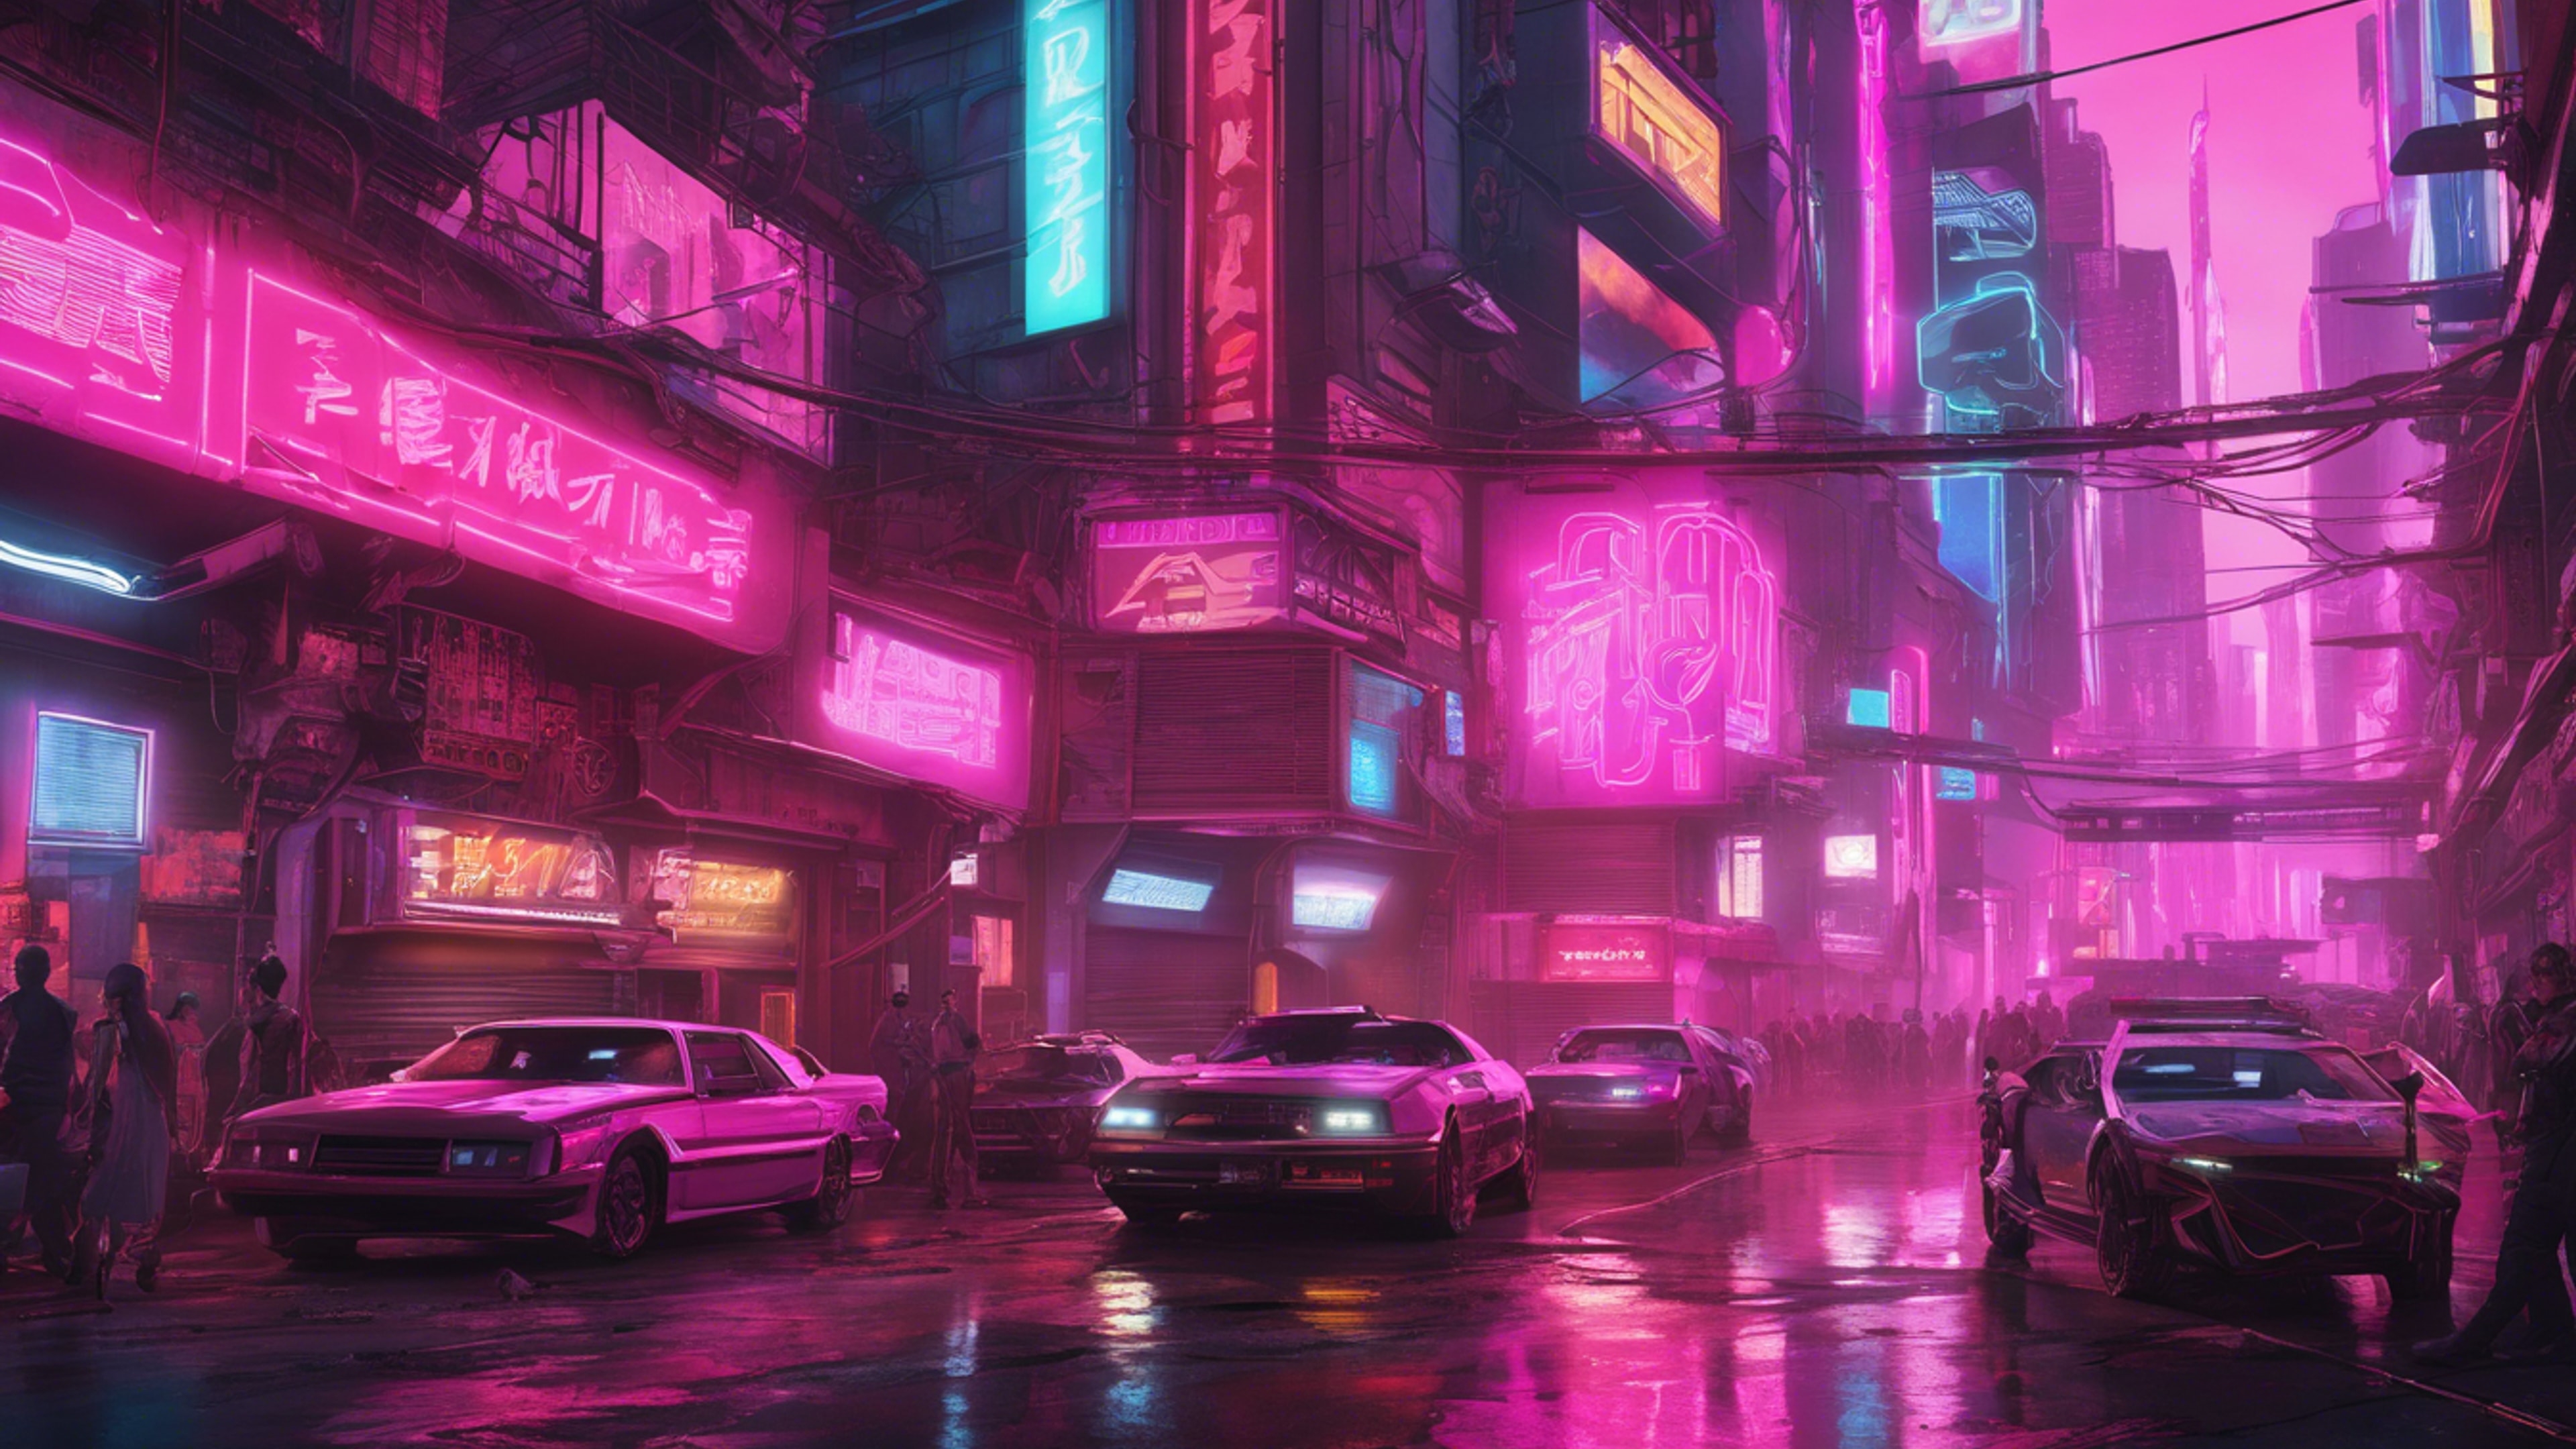 A wide-angle view of a bustling city street in the future, dominated by pink neon signs. کاغذ دیواری[5759e15553a14a8aa13a]